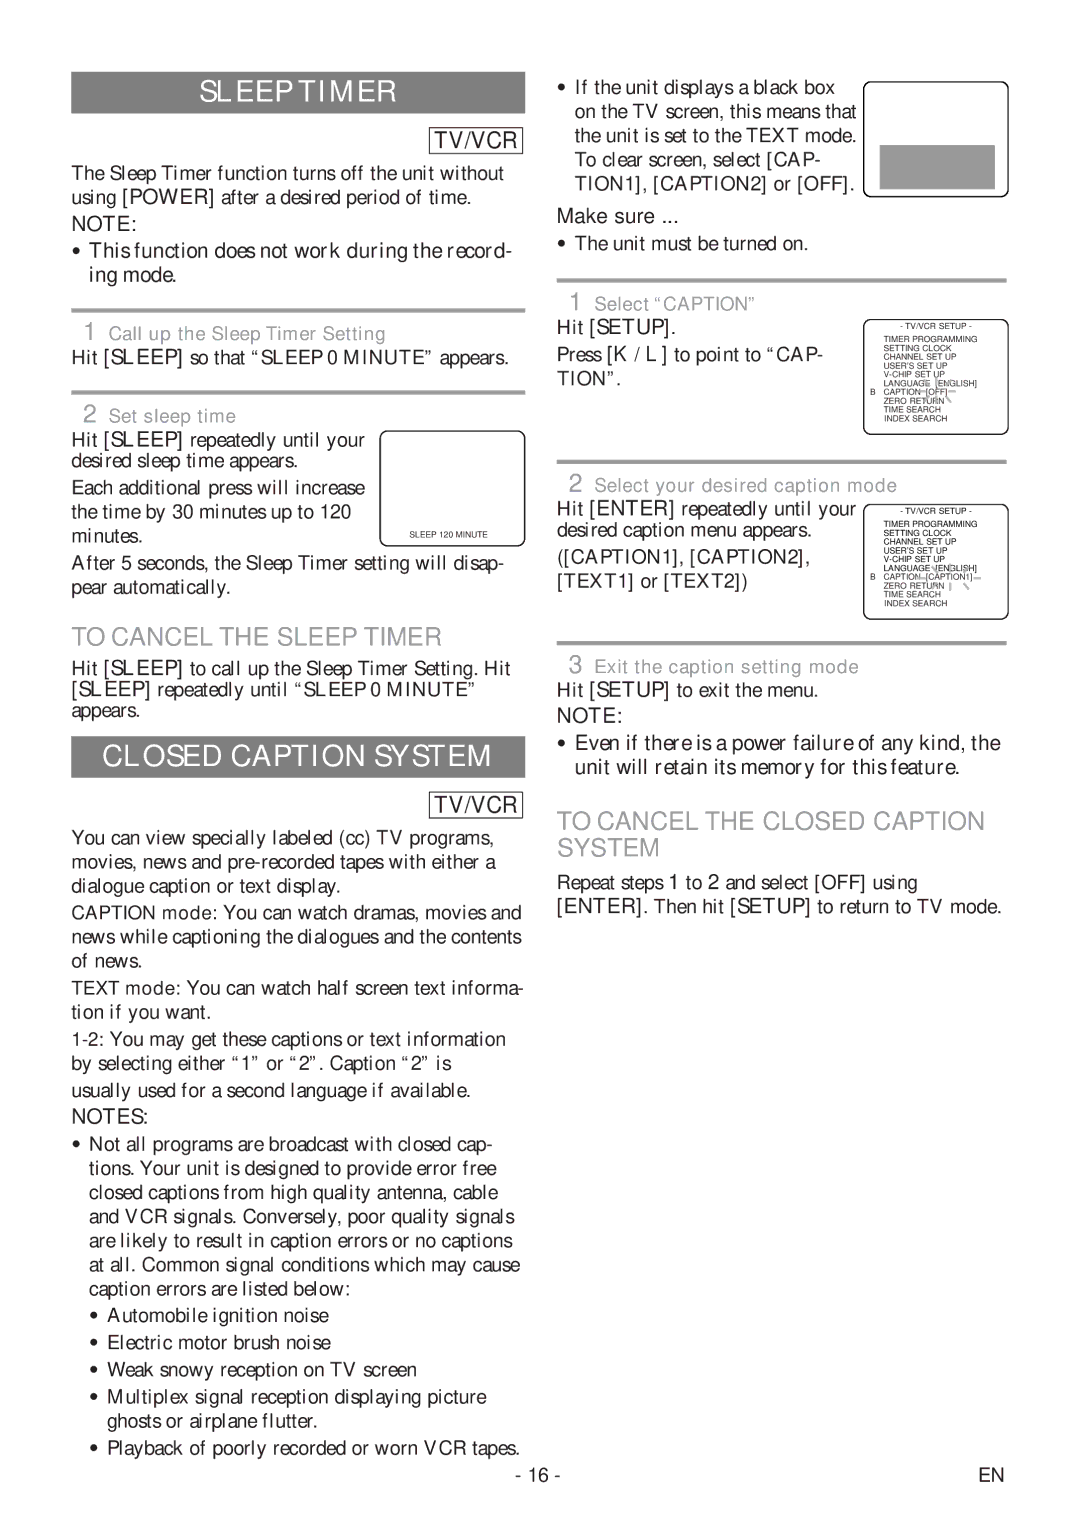 Sylvania 6727DF owner manual To Cancel the Sleep Timer, To Cancel the Closed Caption System 